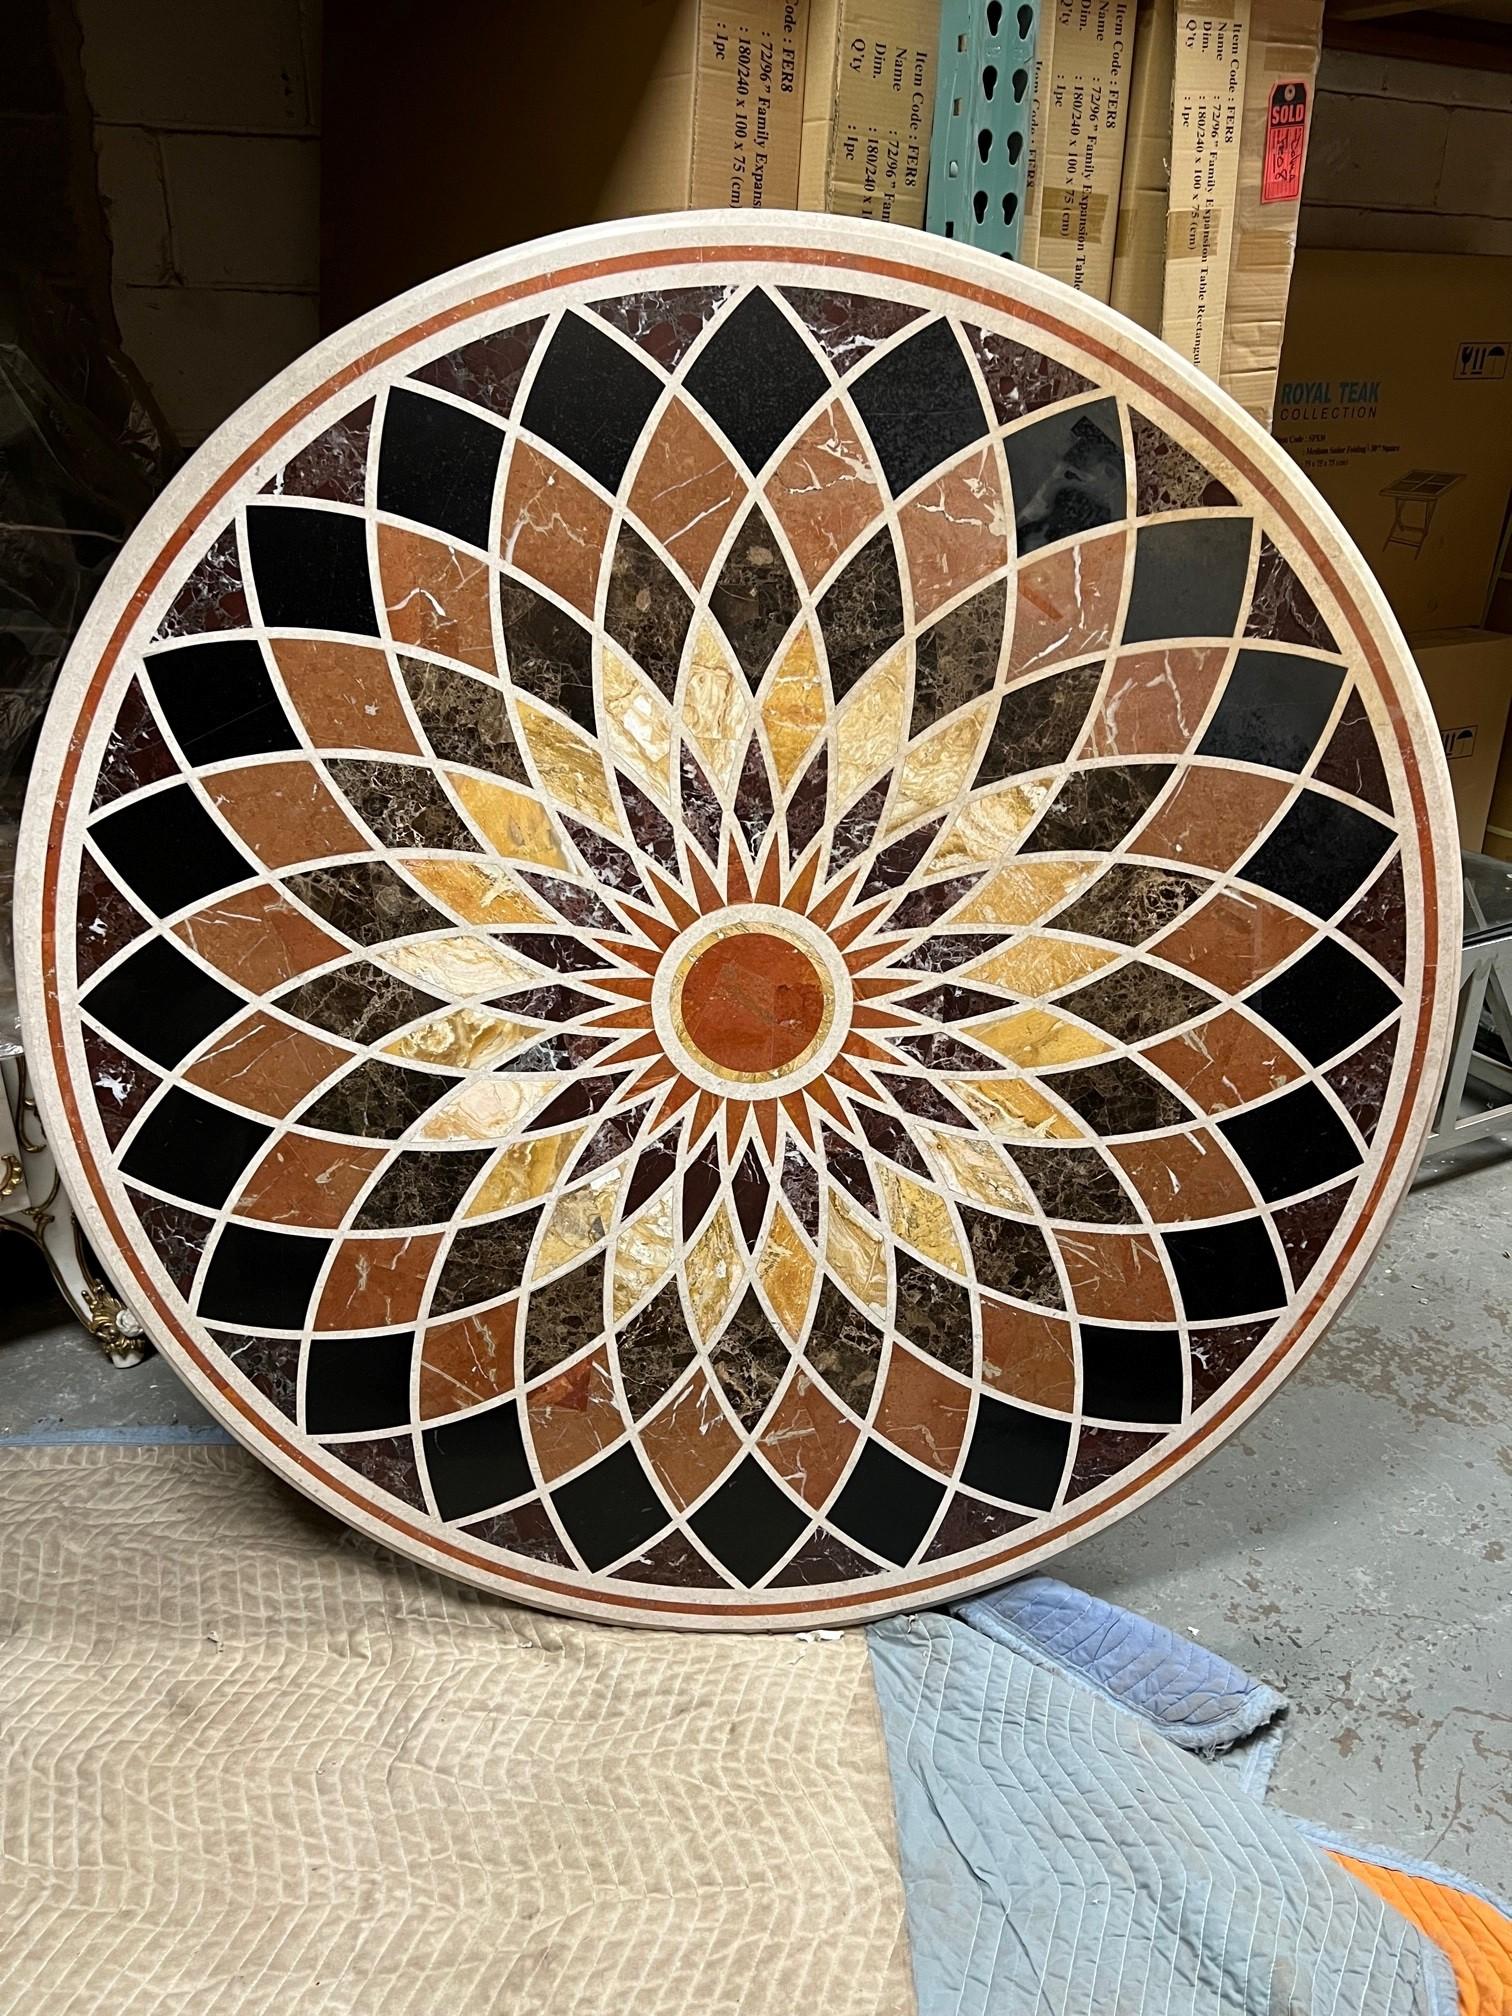 Beautiful Pietra Dura round table top with geometric shapes and a warm earth tone color palette.  Pietra Dura (Pietra=Stone, Dura=Hard) is the use of hard stones and semi precious stones in a mosaic. This craft started in Florence Italy in the late